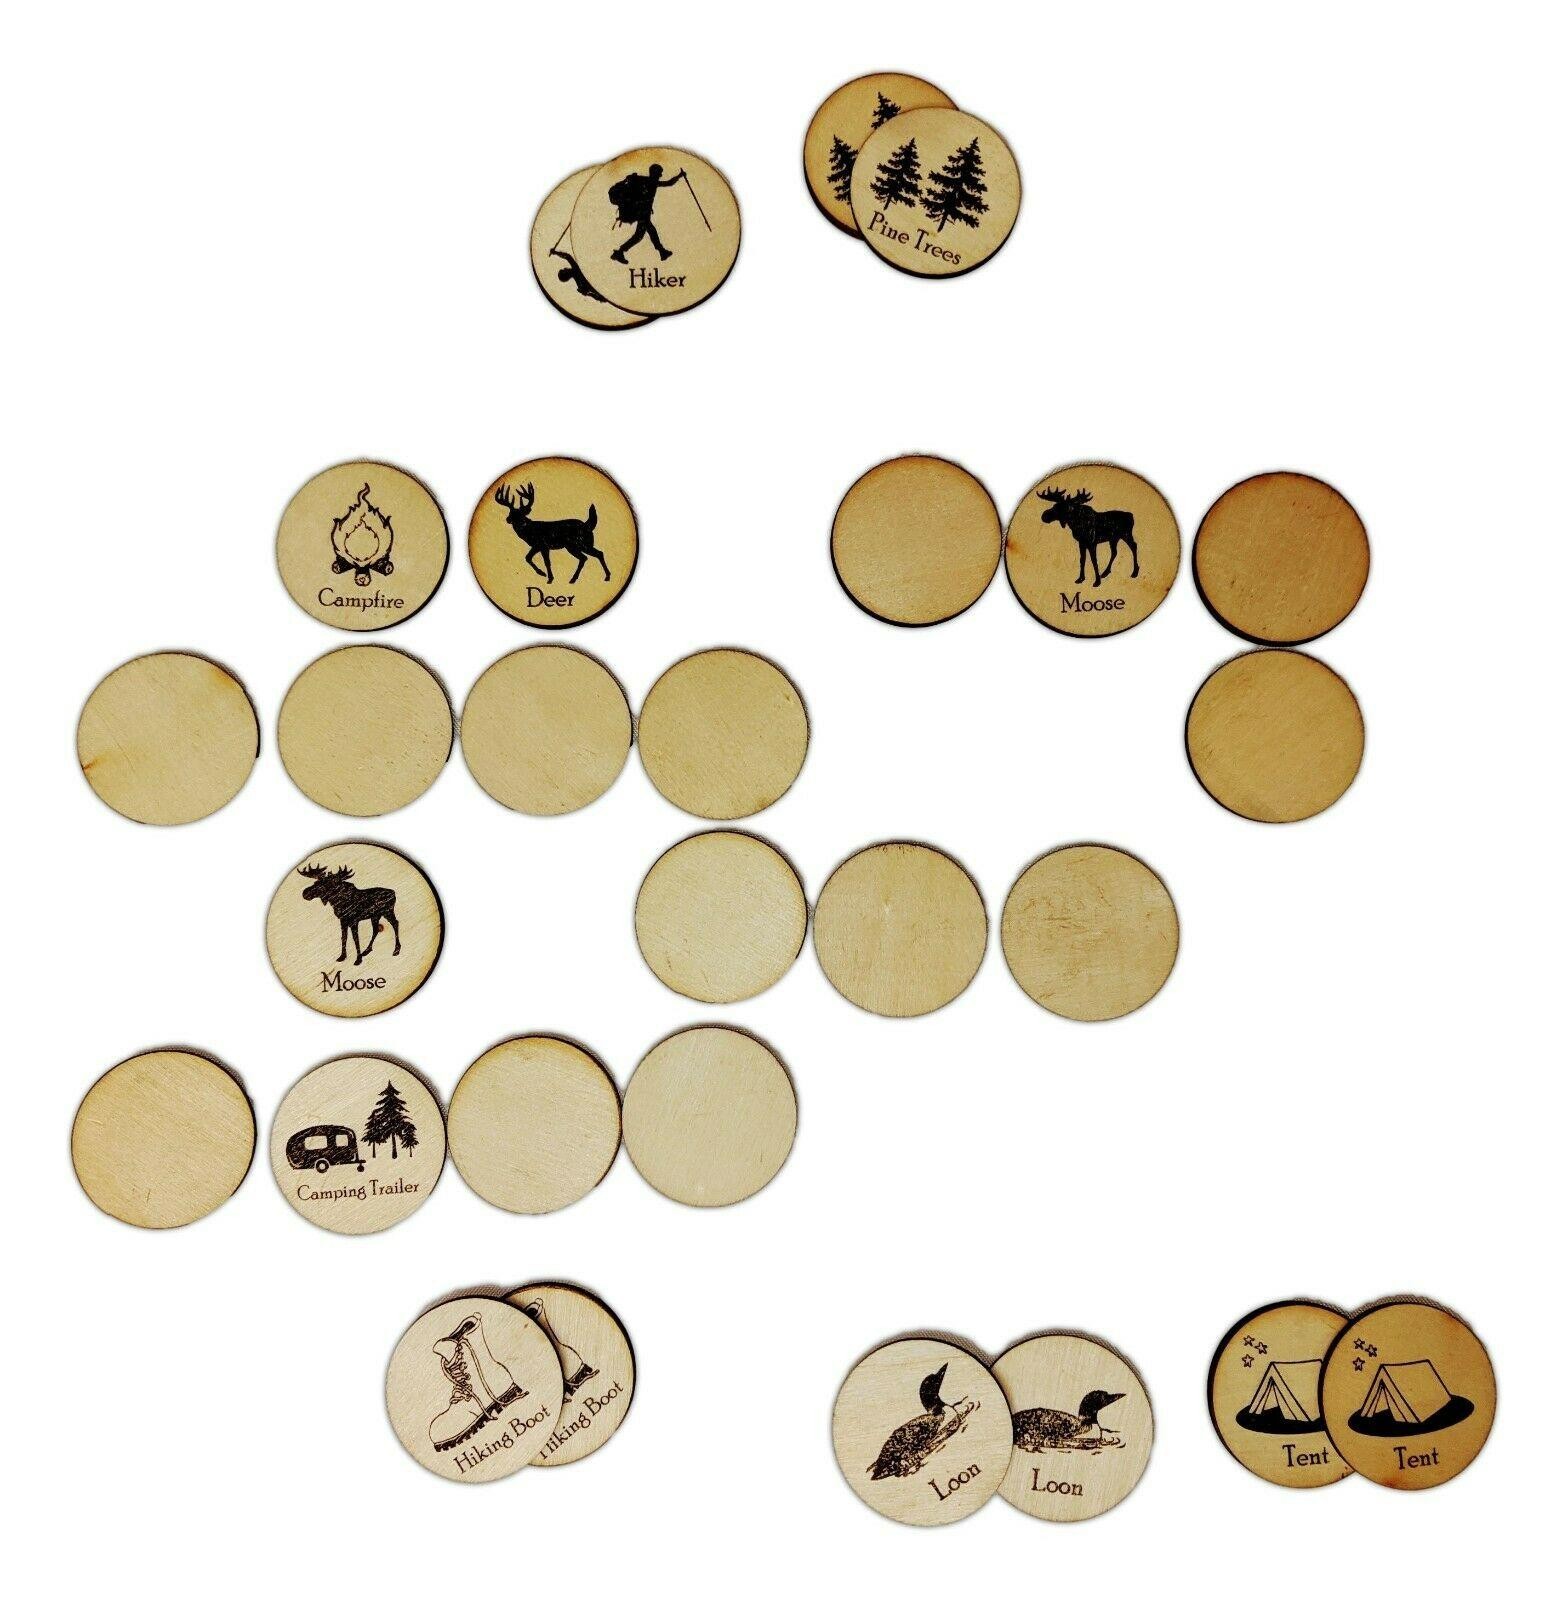 Wooden Handmade MATCHING GAME Outdoor Themed Discs  by Wilcor